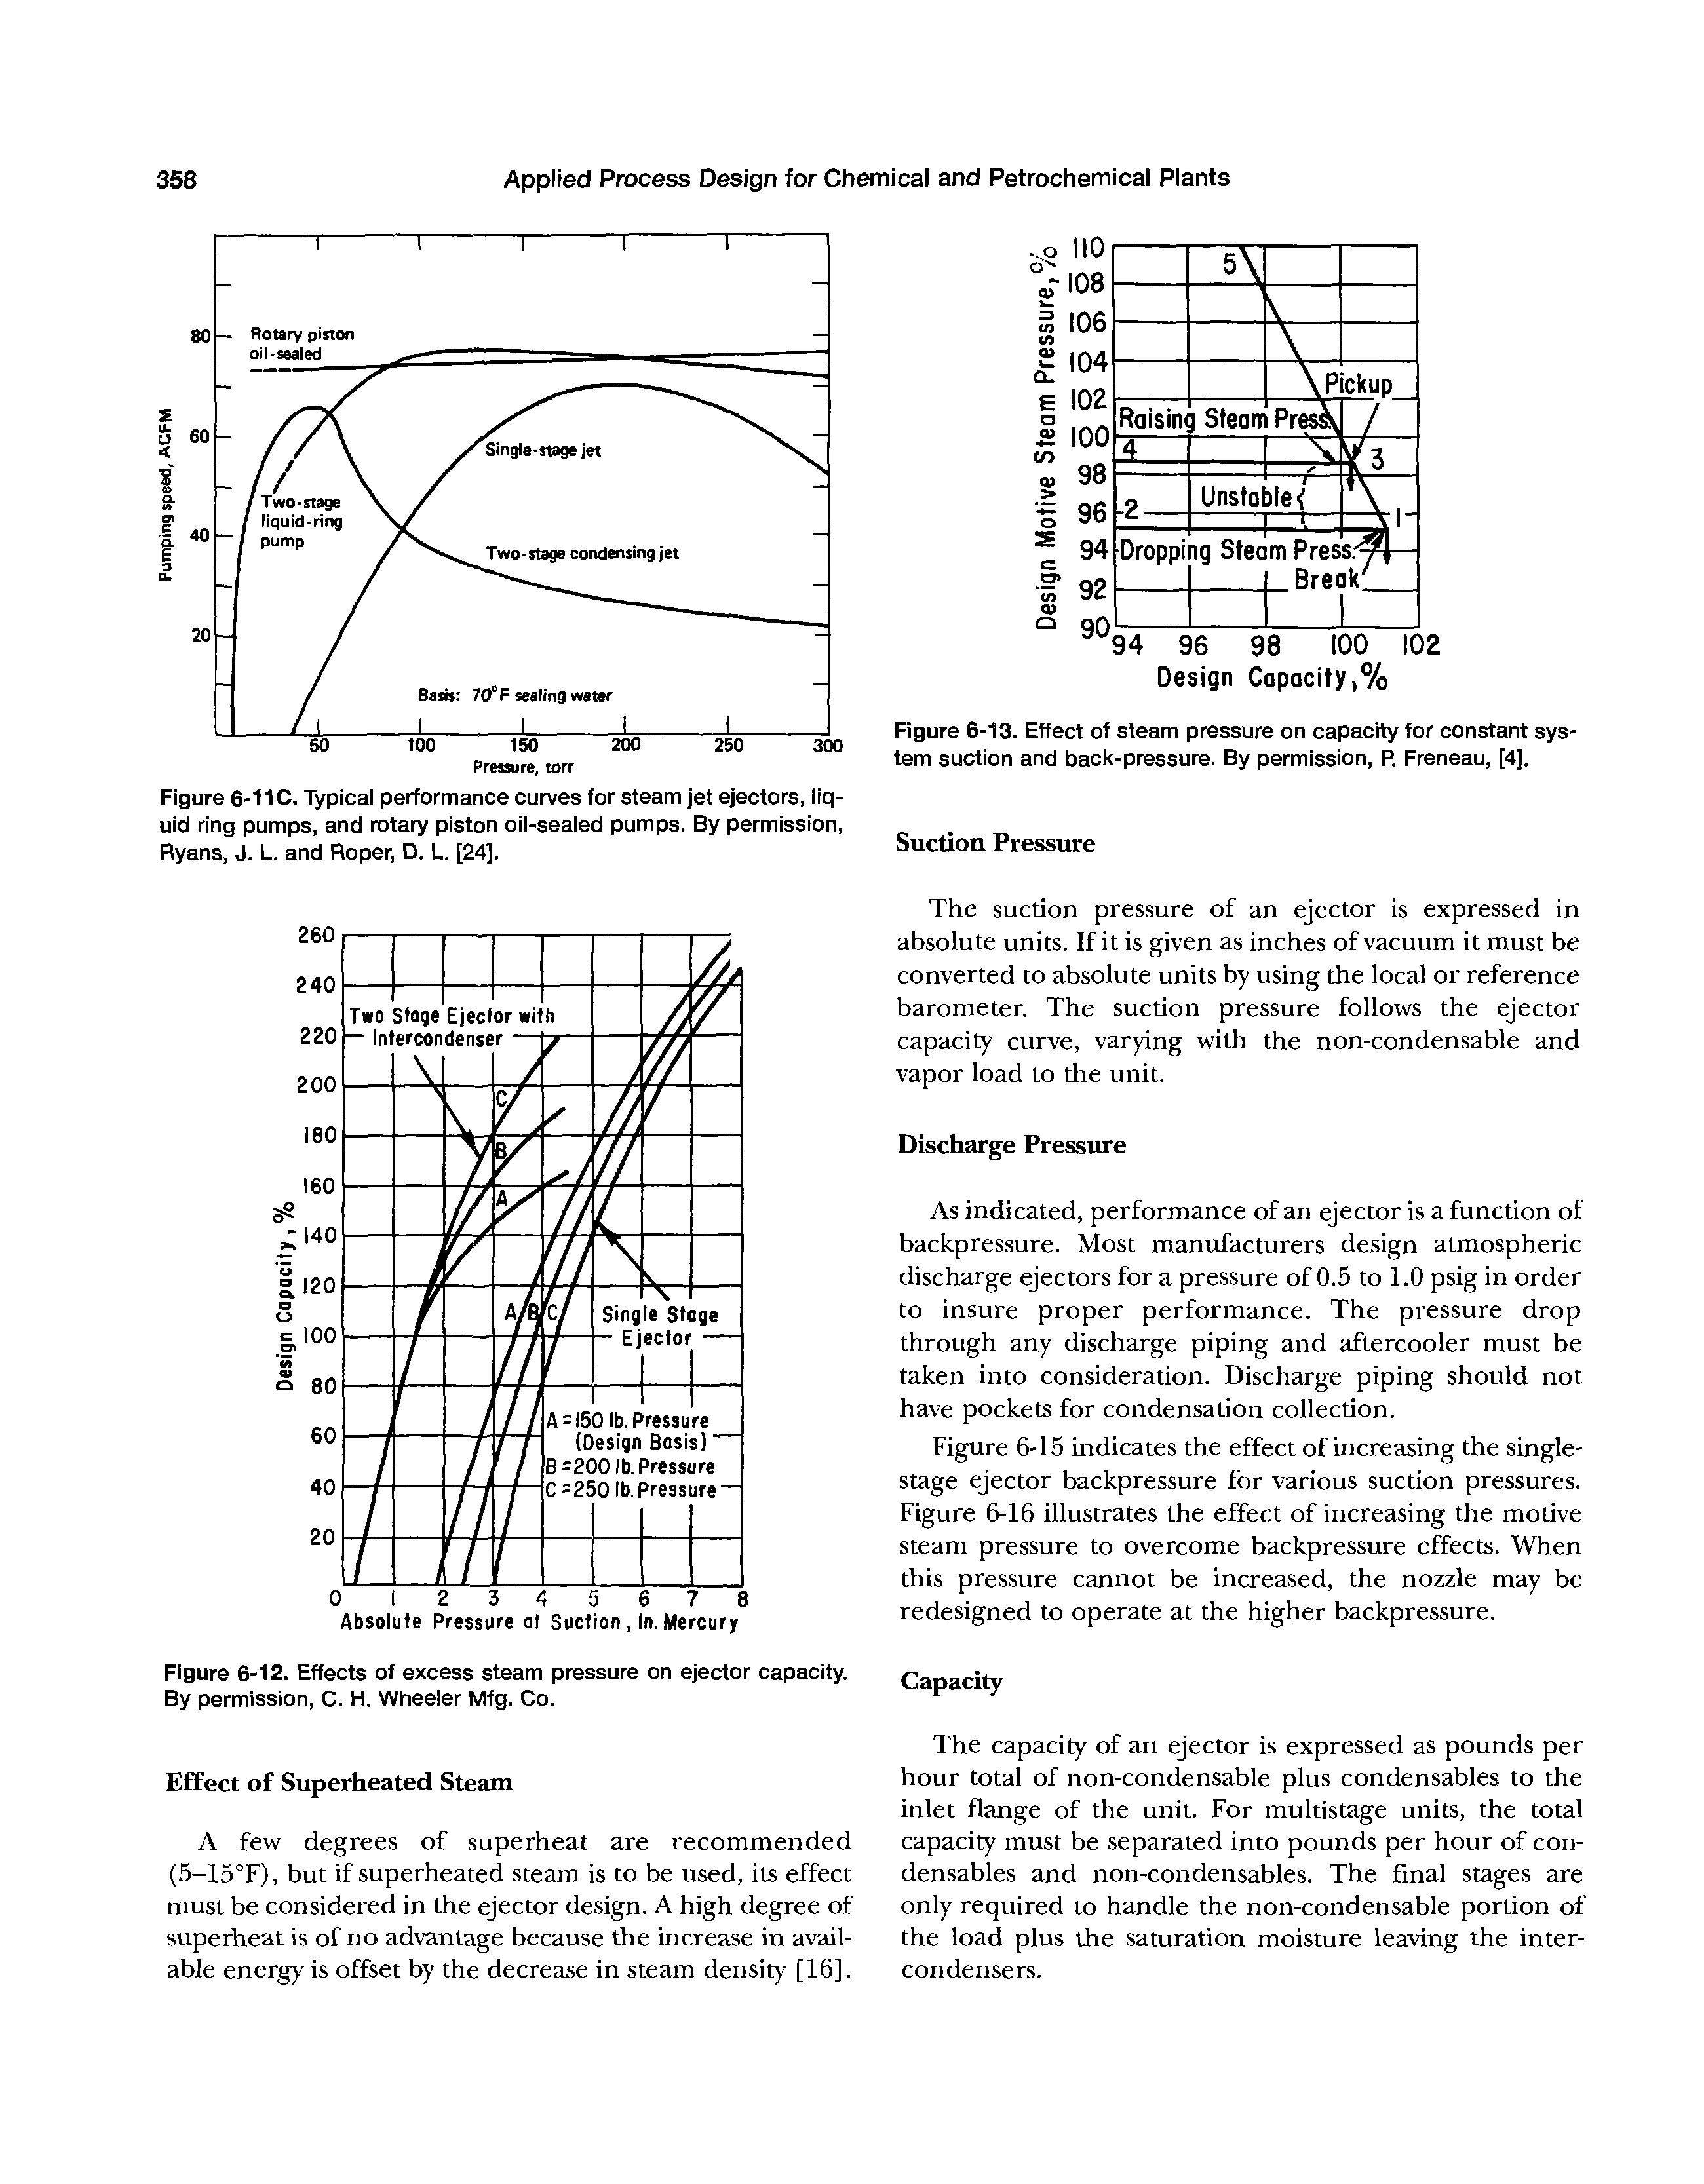 Figure 6-12. Effects of excess steam pressure on ejector capacity. By permission, C. H. Wheeler Mfg. Co.